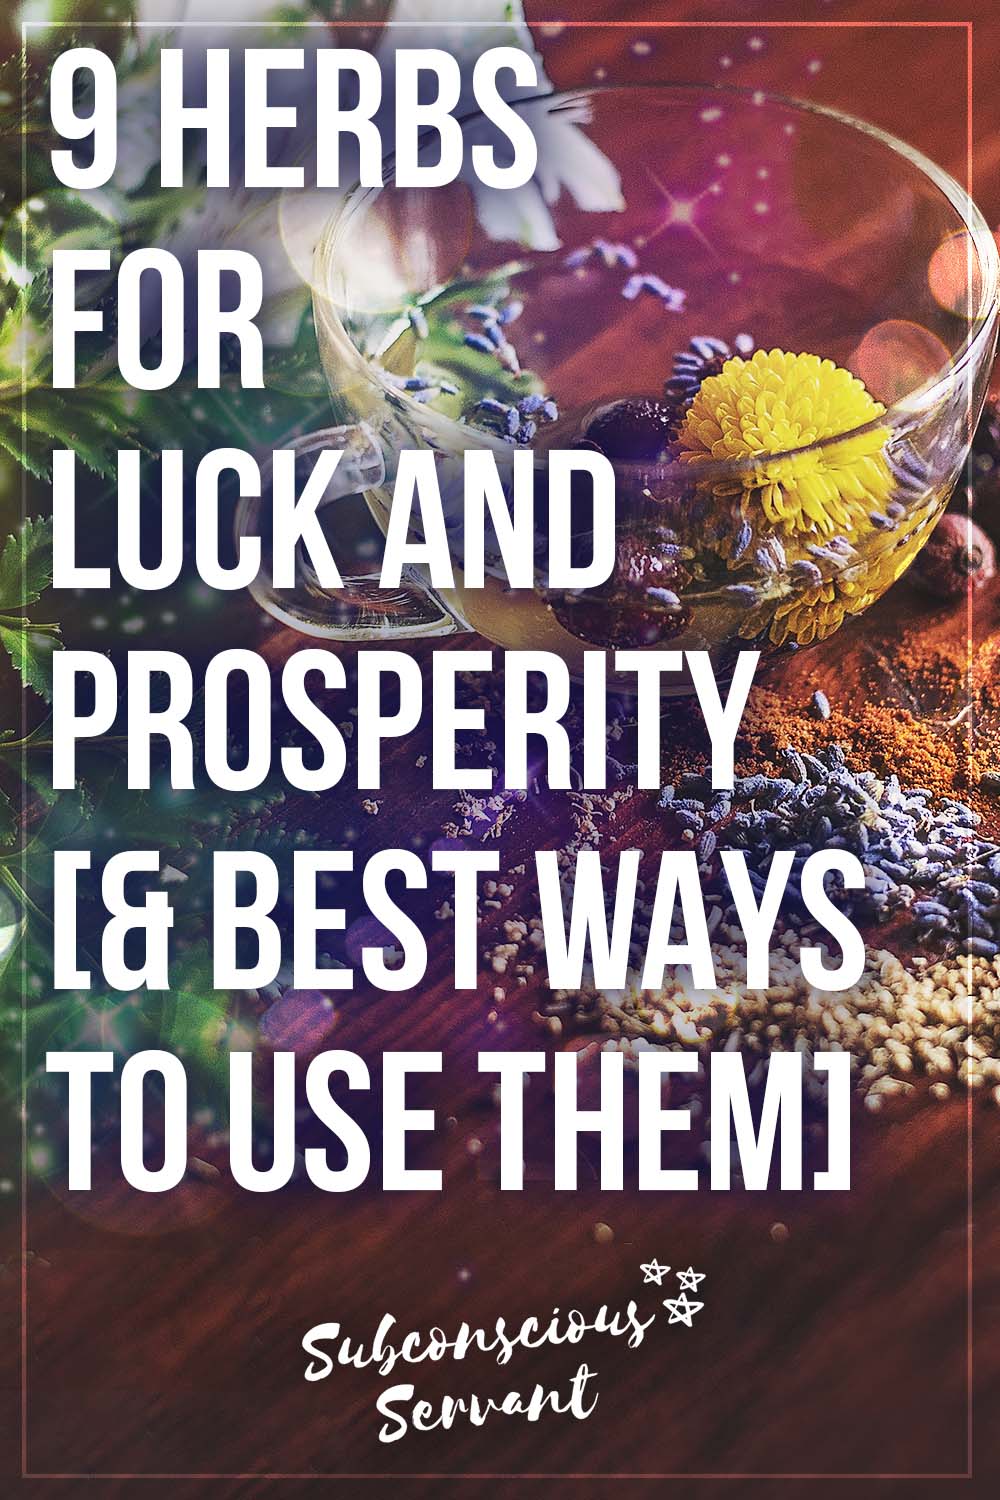 9 Herbs For Luck And Prosperity [& Best Ways To Use Them]